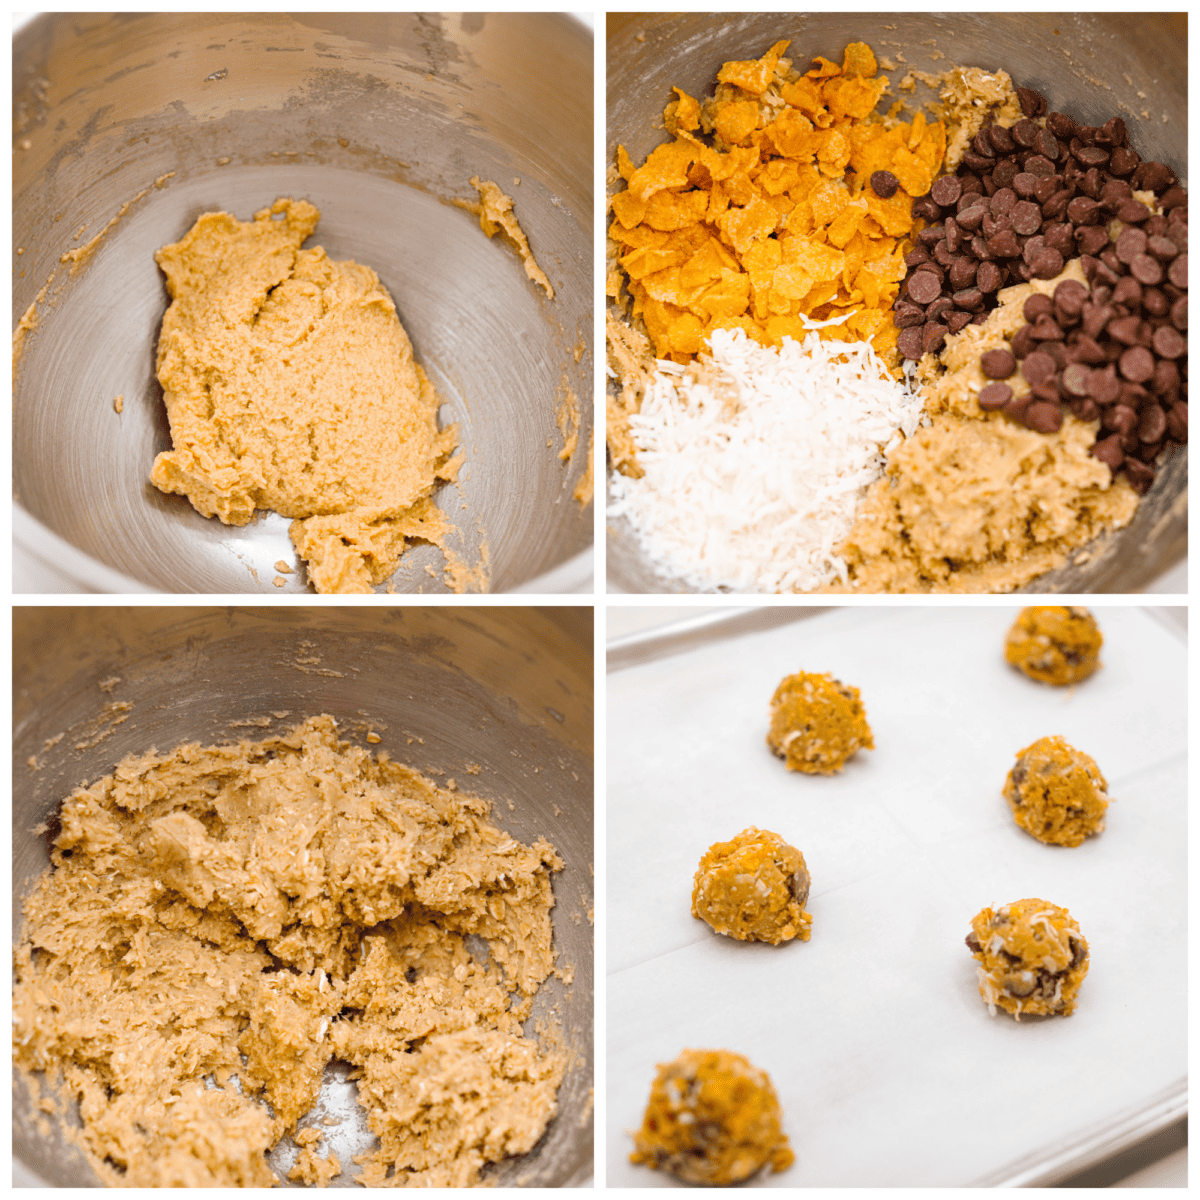 4-photo collage of the dough being prepared.